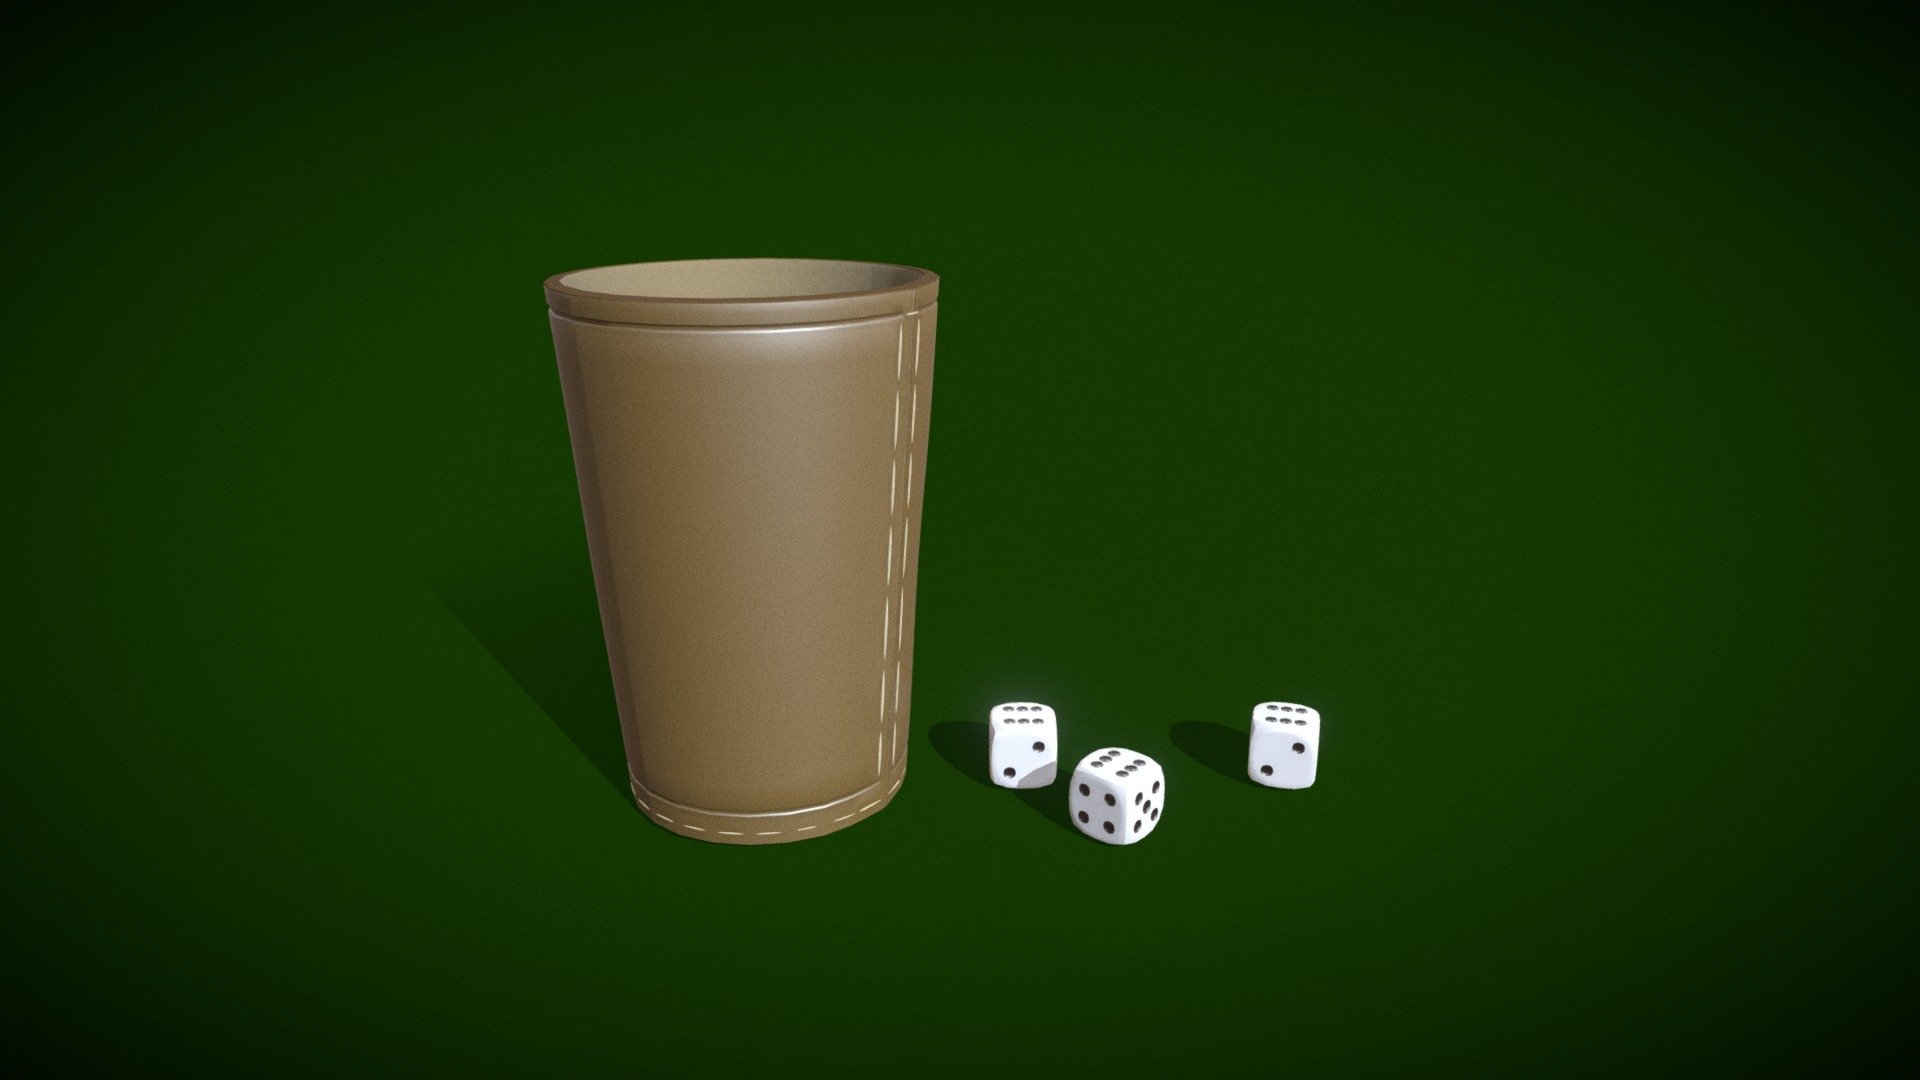 Typical dices with leather cup game objects.
Low Poly Mesh. Easy subdivide for smoothness 3d model